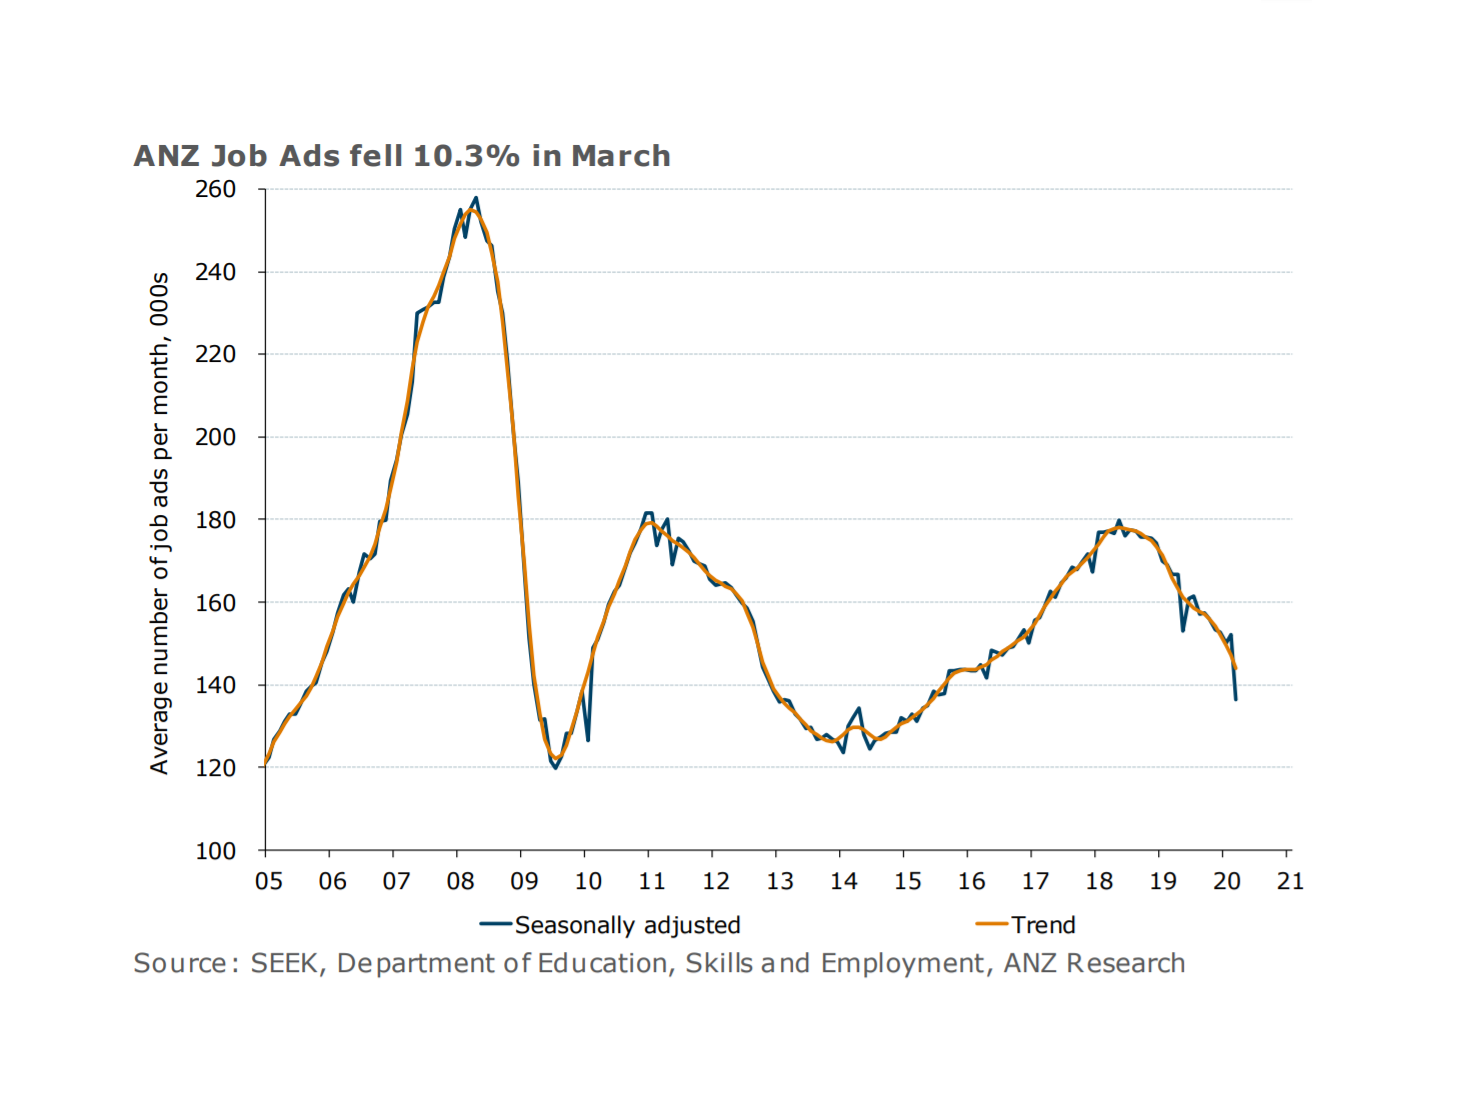 A line graph showing job ads falling sharply due to the coroanvirus pandemic.